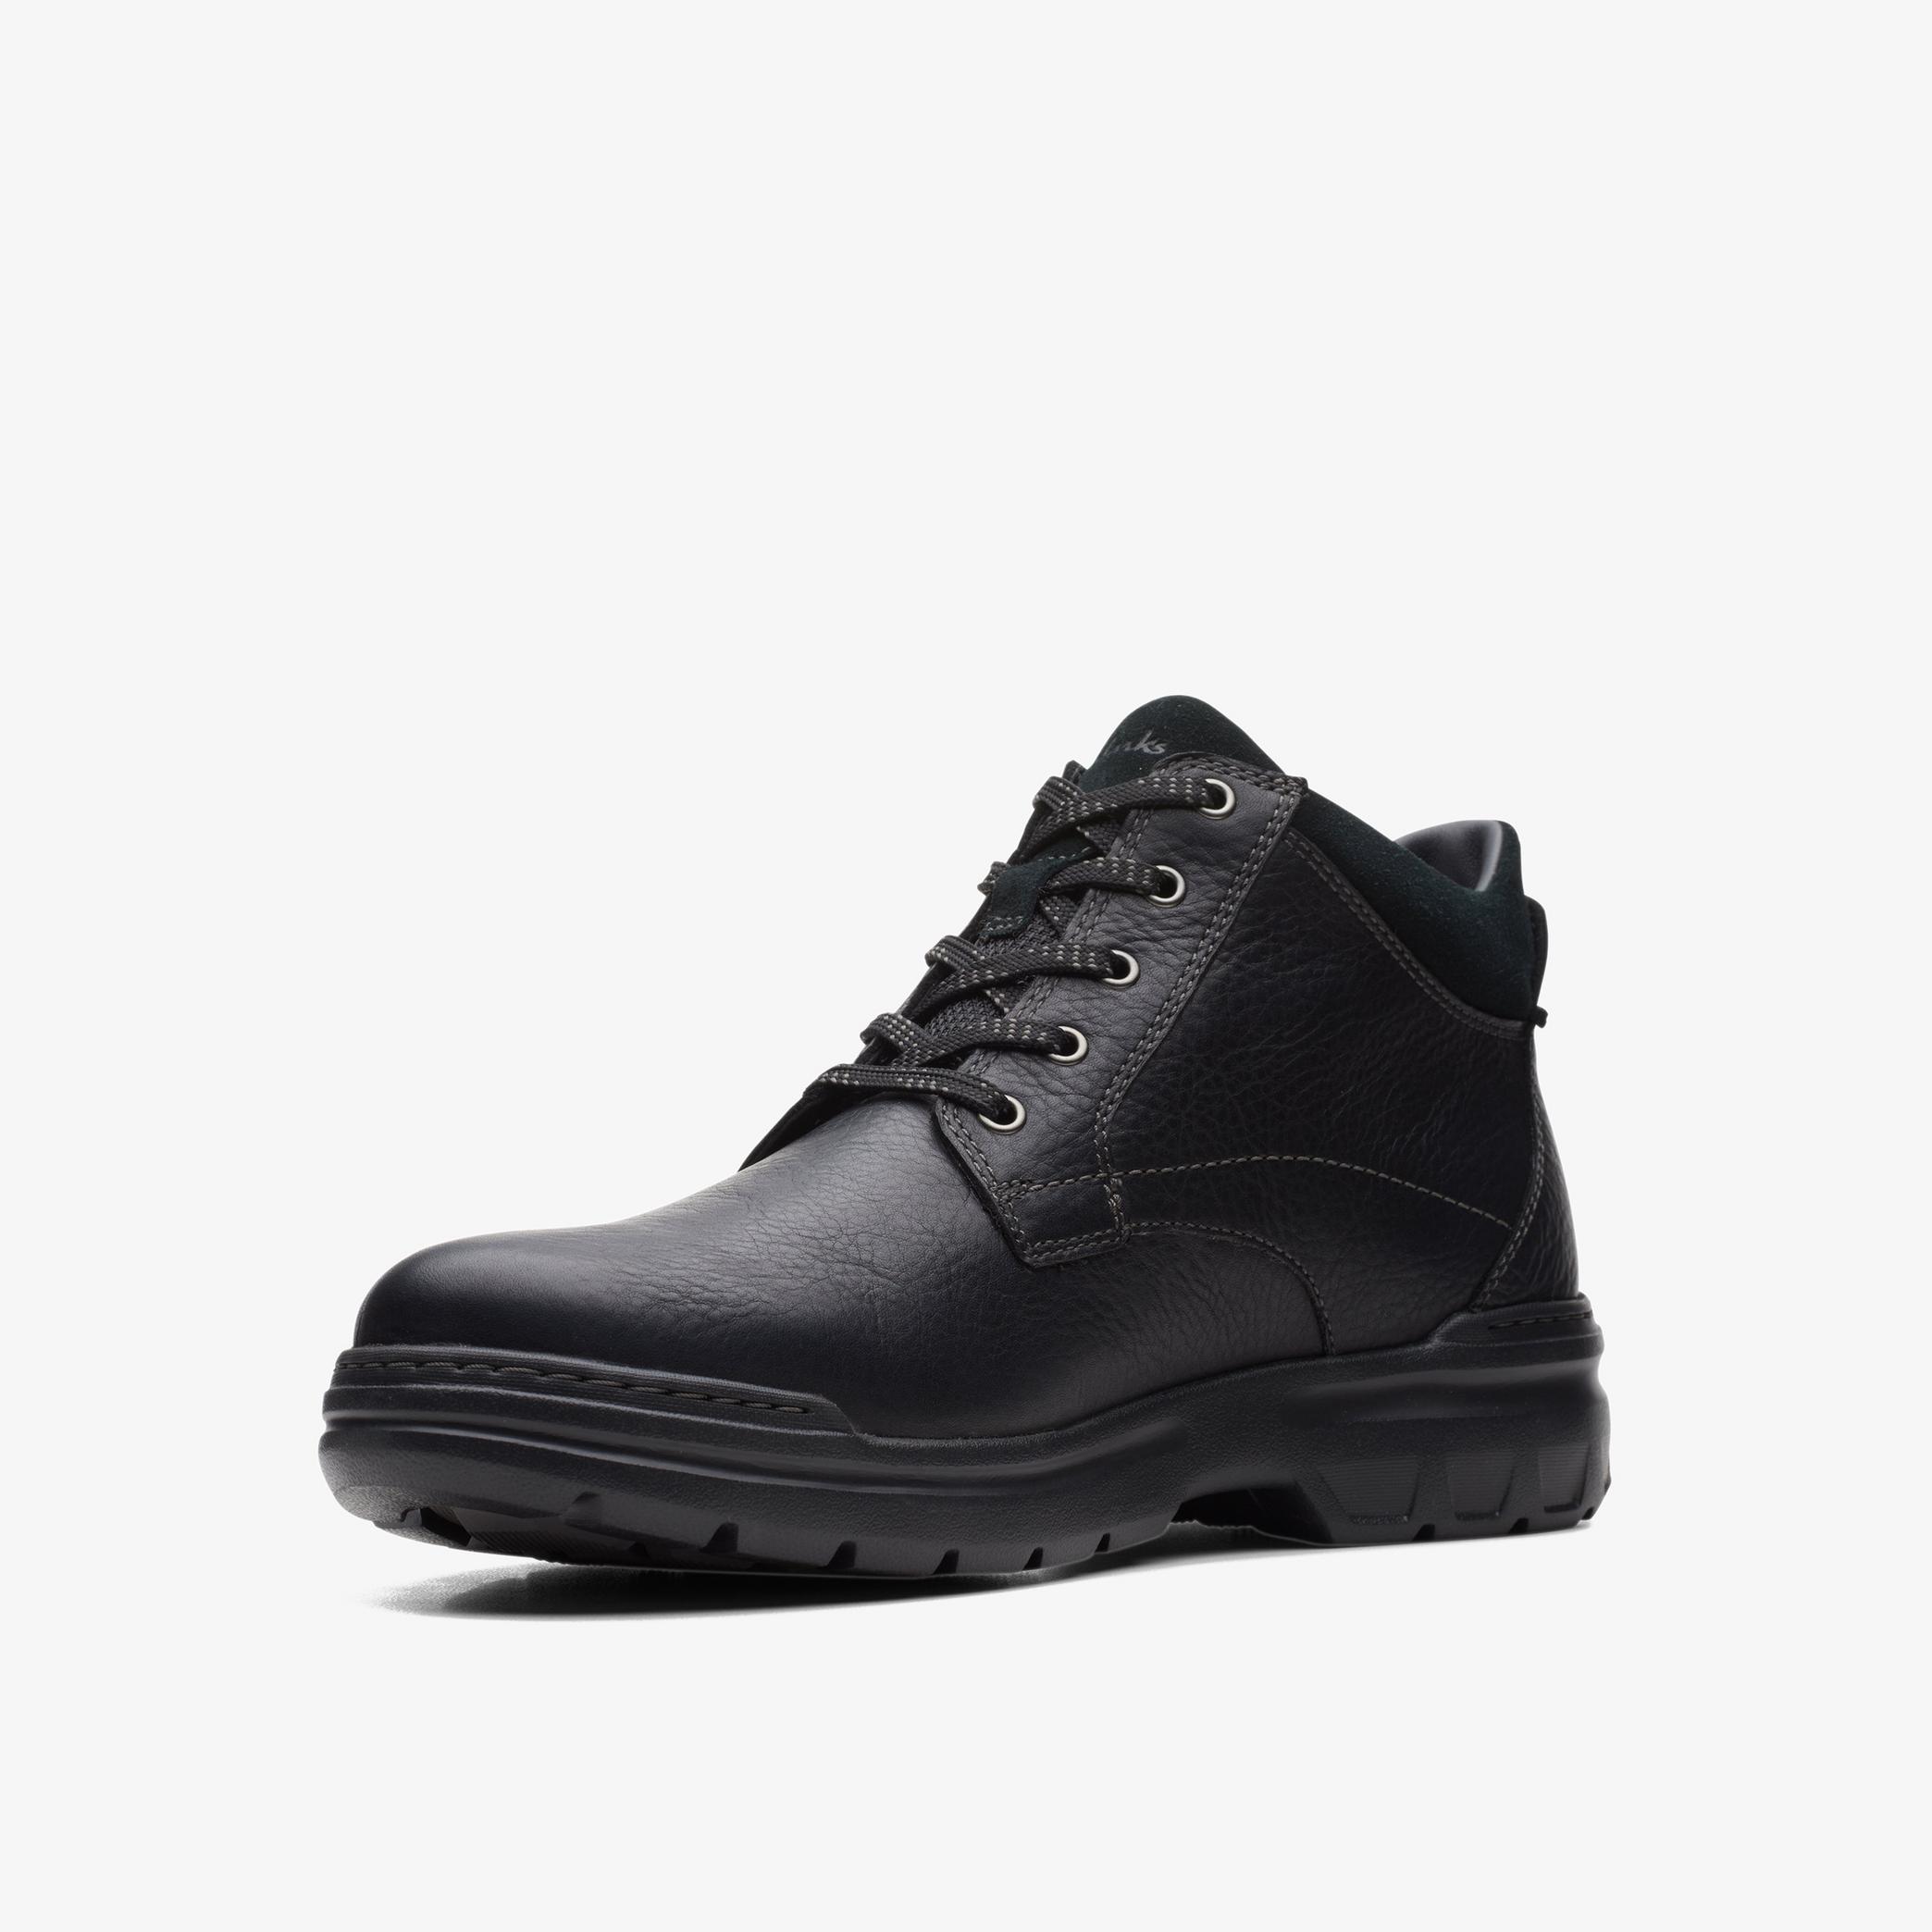 Rockie2 Up GTX Black Leather Ankle Boots, view 4 of 6